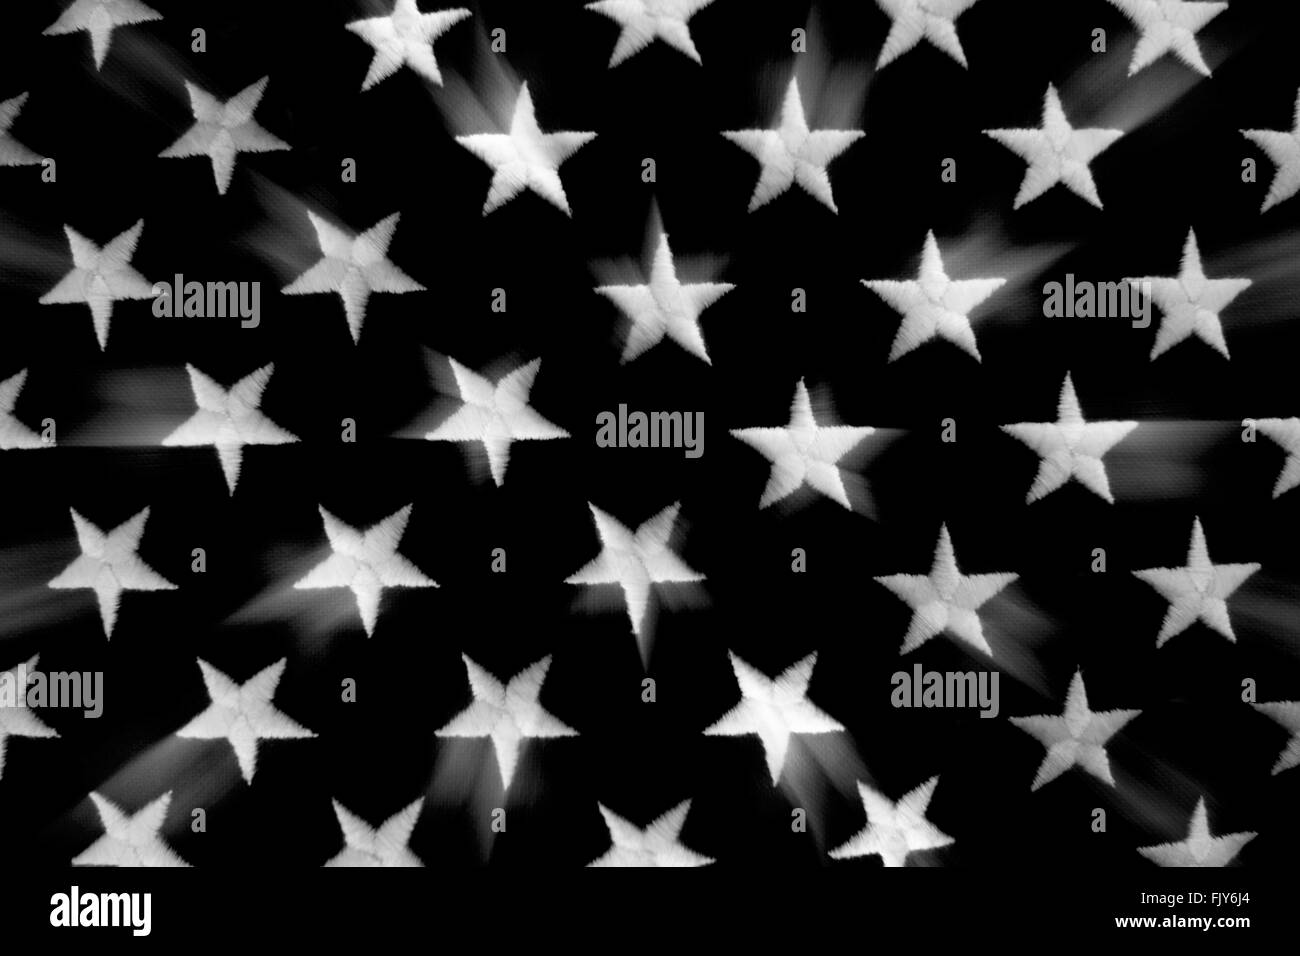 EMBROIDERED FIVE POINT WHITE STARS ON BLACK BACKGROUND Stock Photo